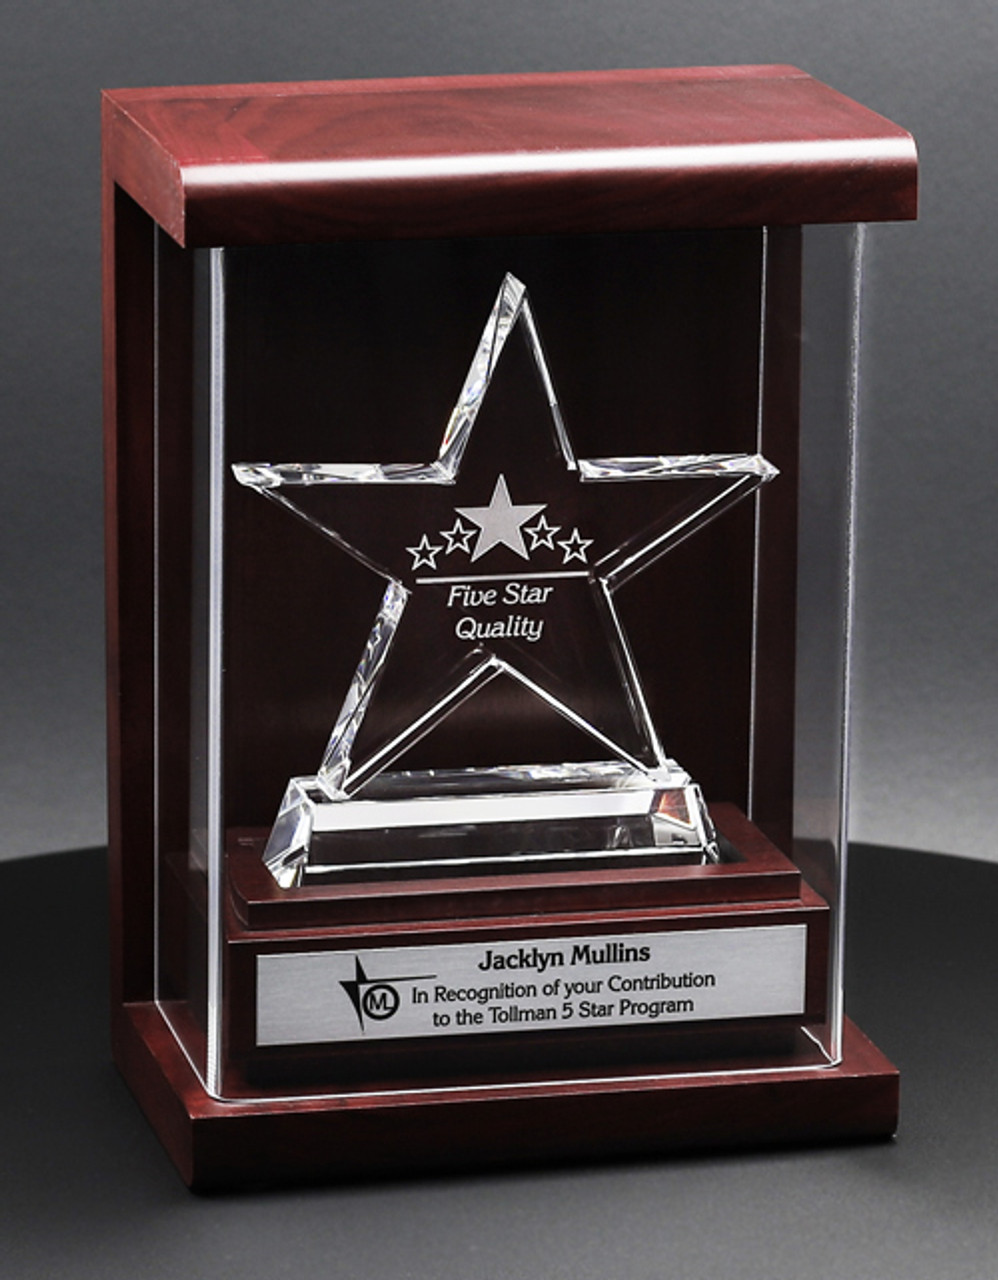 Victory Star Award Plaque for Employee Recognition